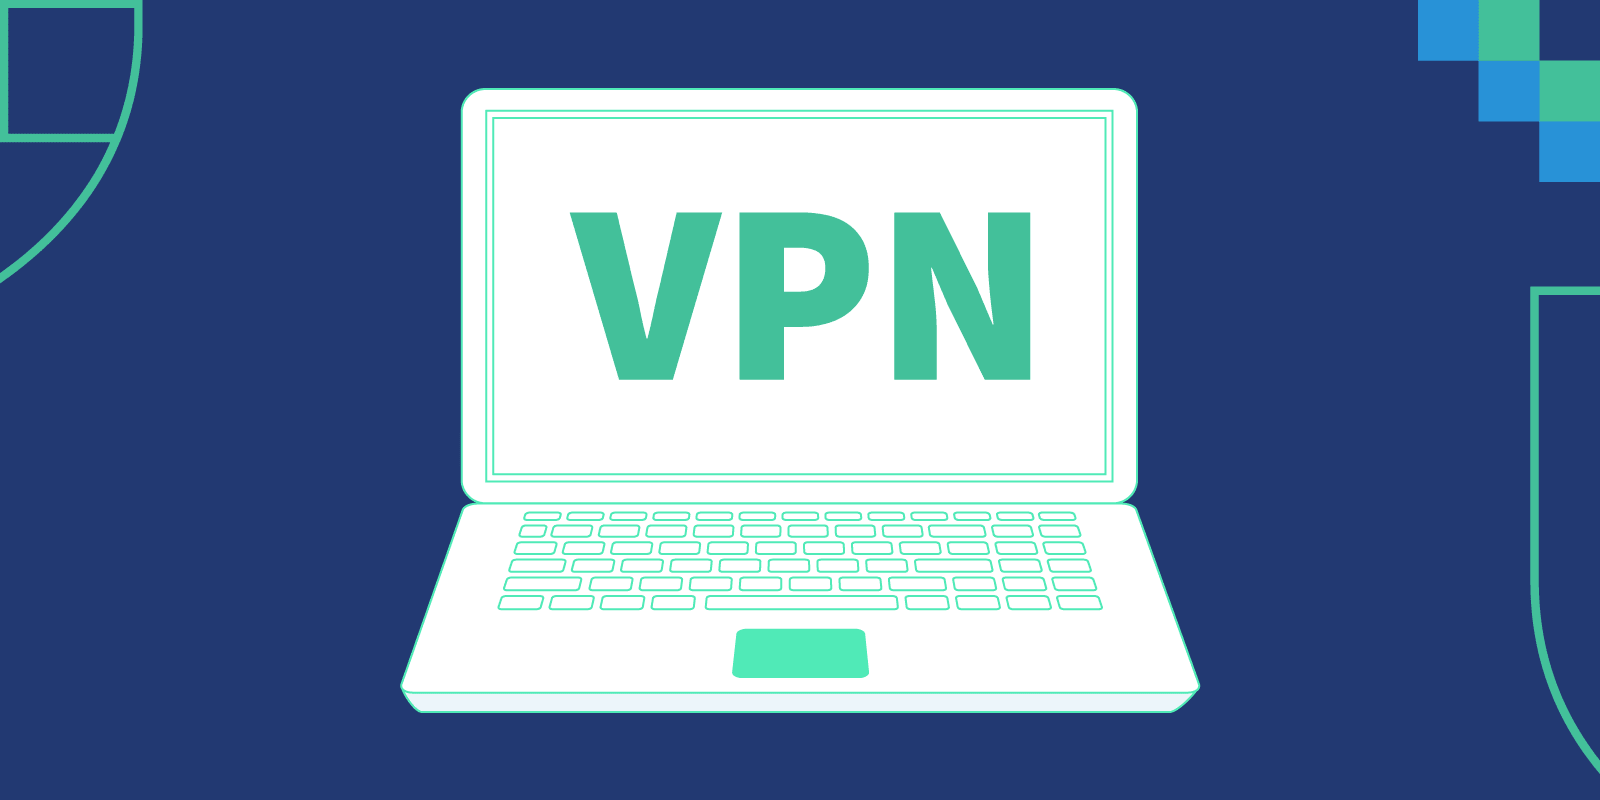 Why is VPN Crucial for the Batmanstream?